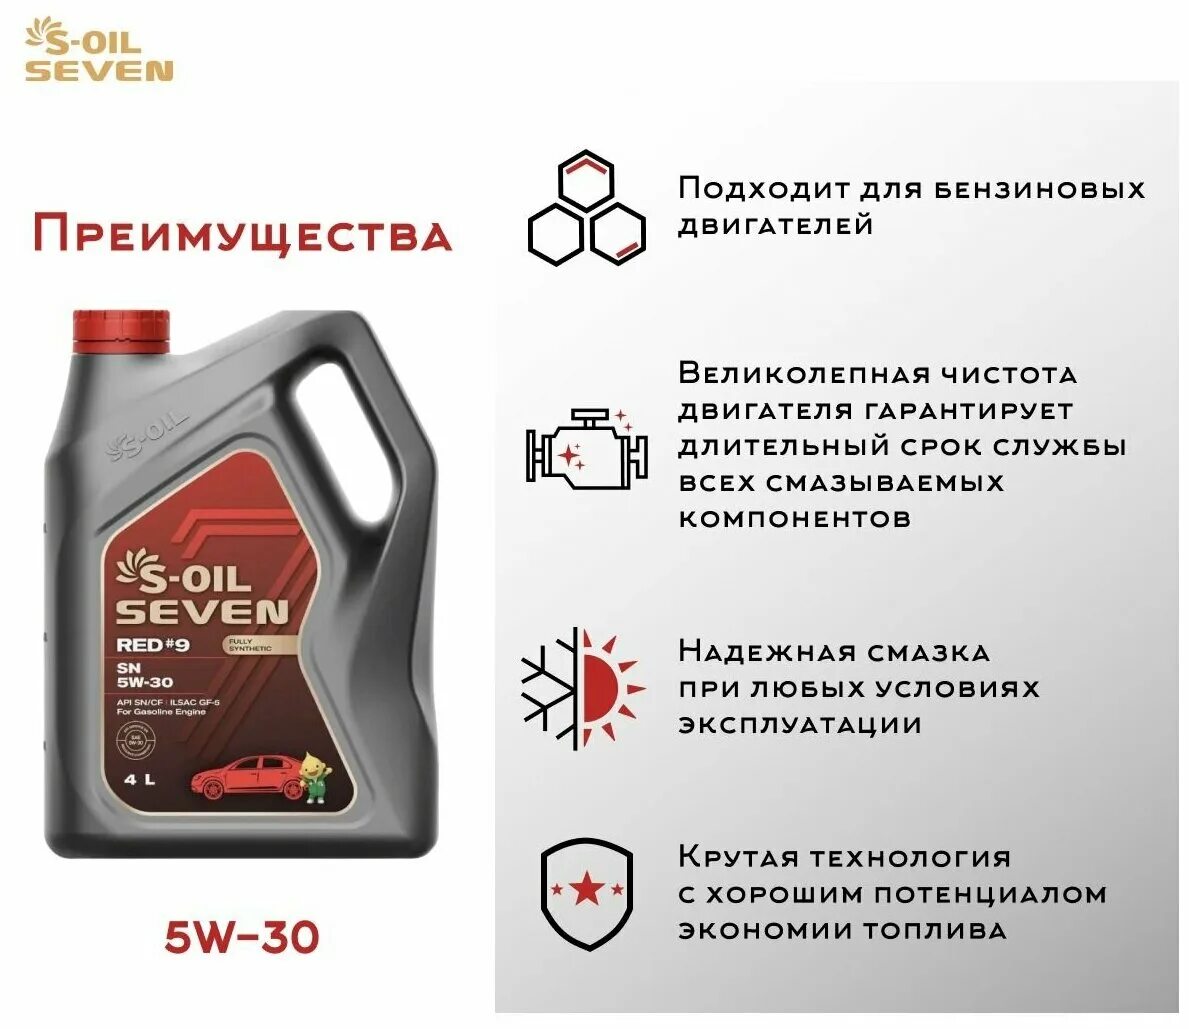 Масло севен. S Oil Seven Red 9 5w30. Масло s-Oil Seven Red 9. S-Oil Seven Red #9 SP 5w20 4л. S-Oil Seven 5w-30.